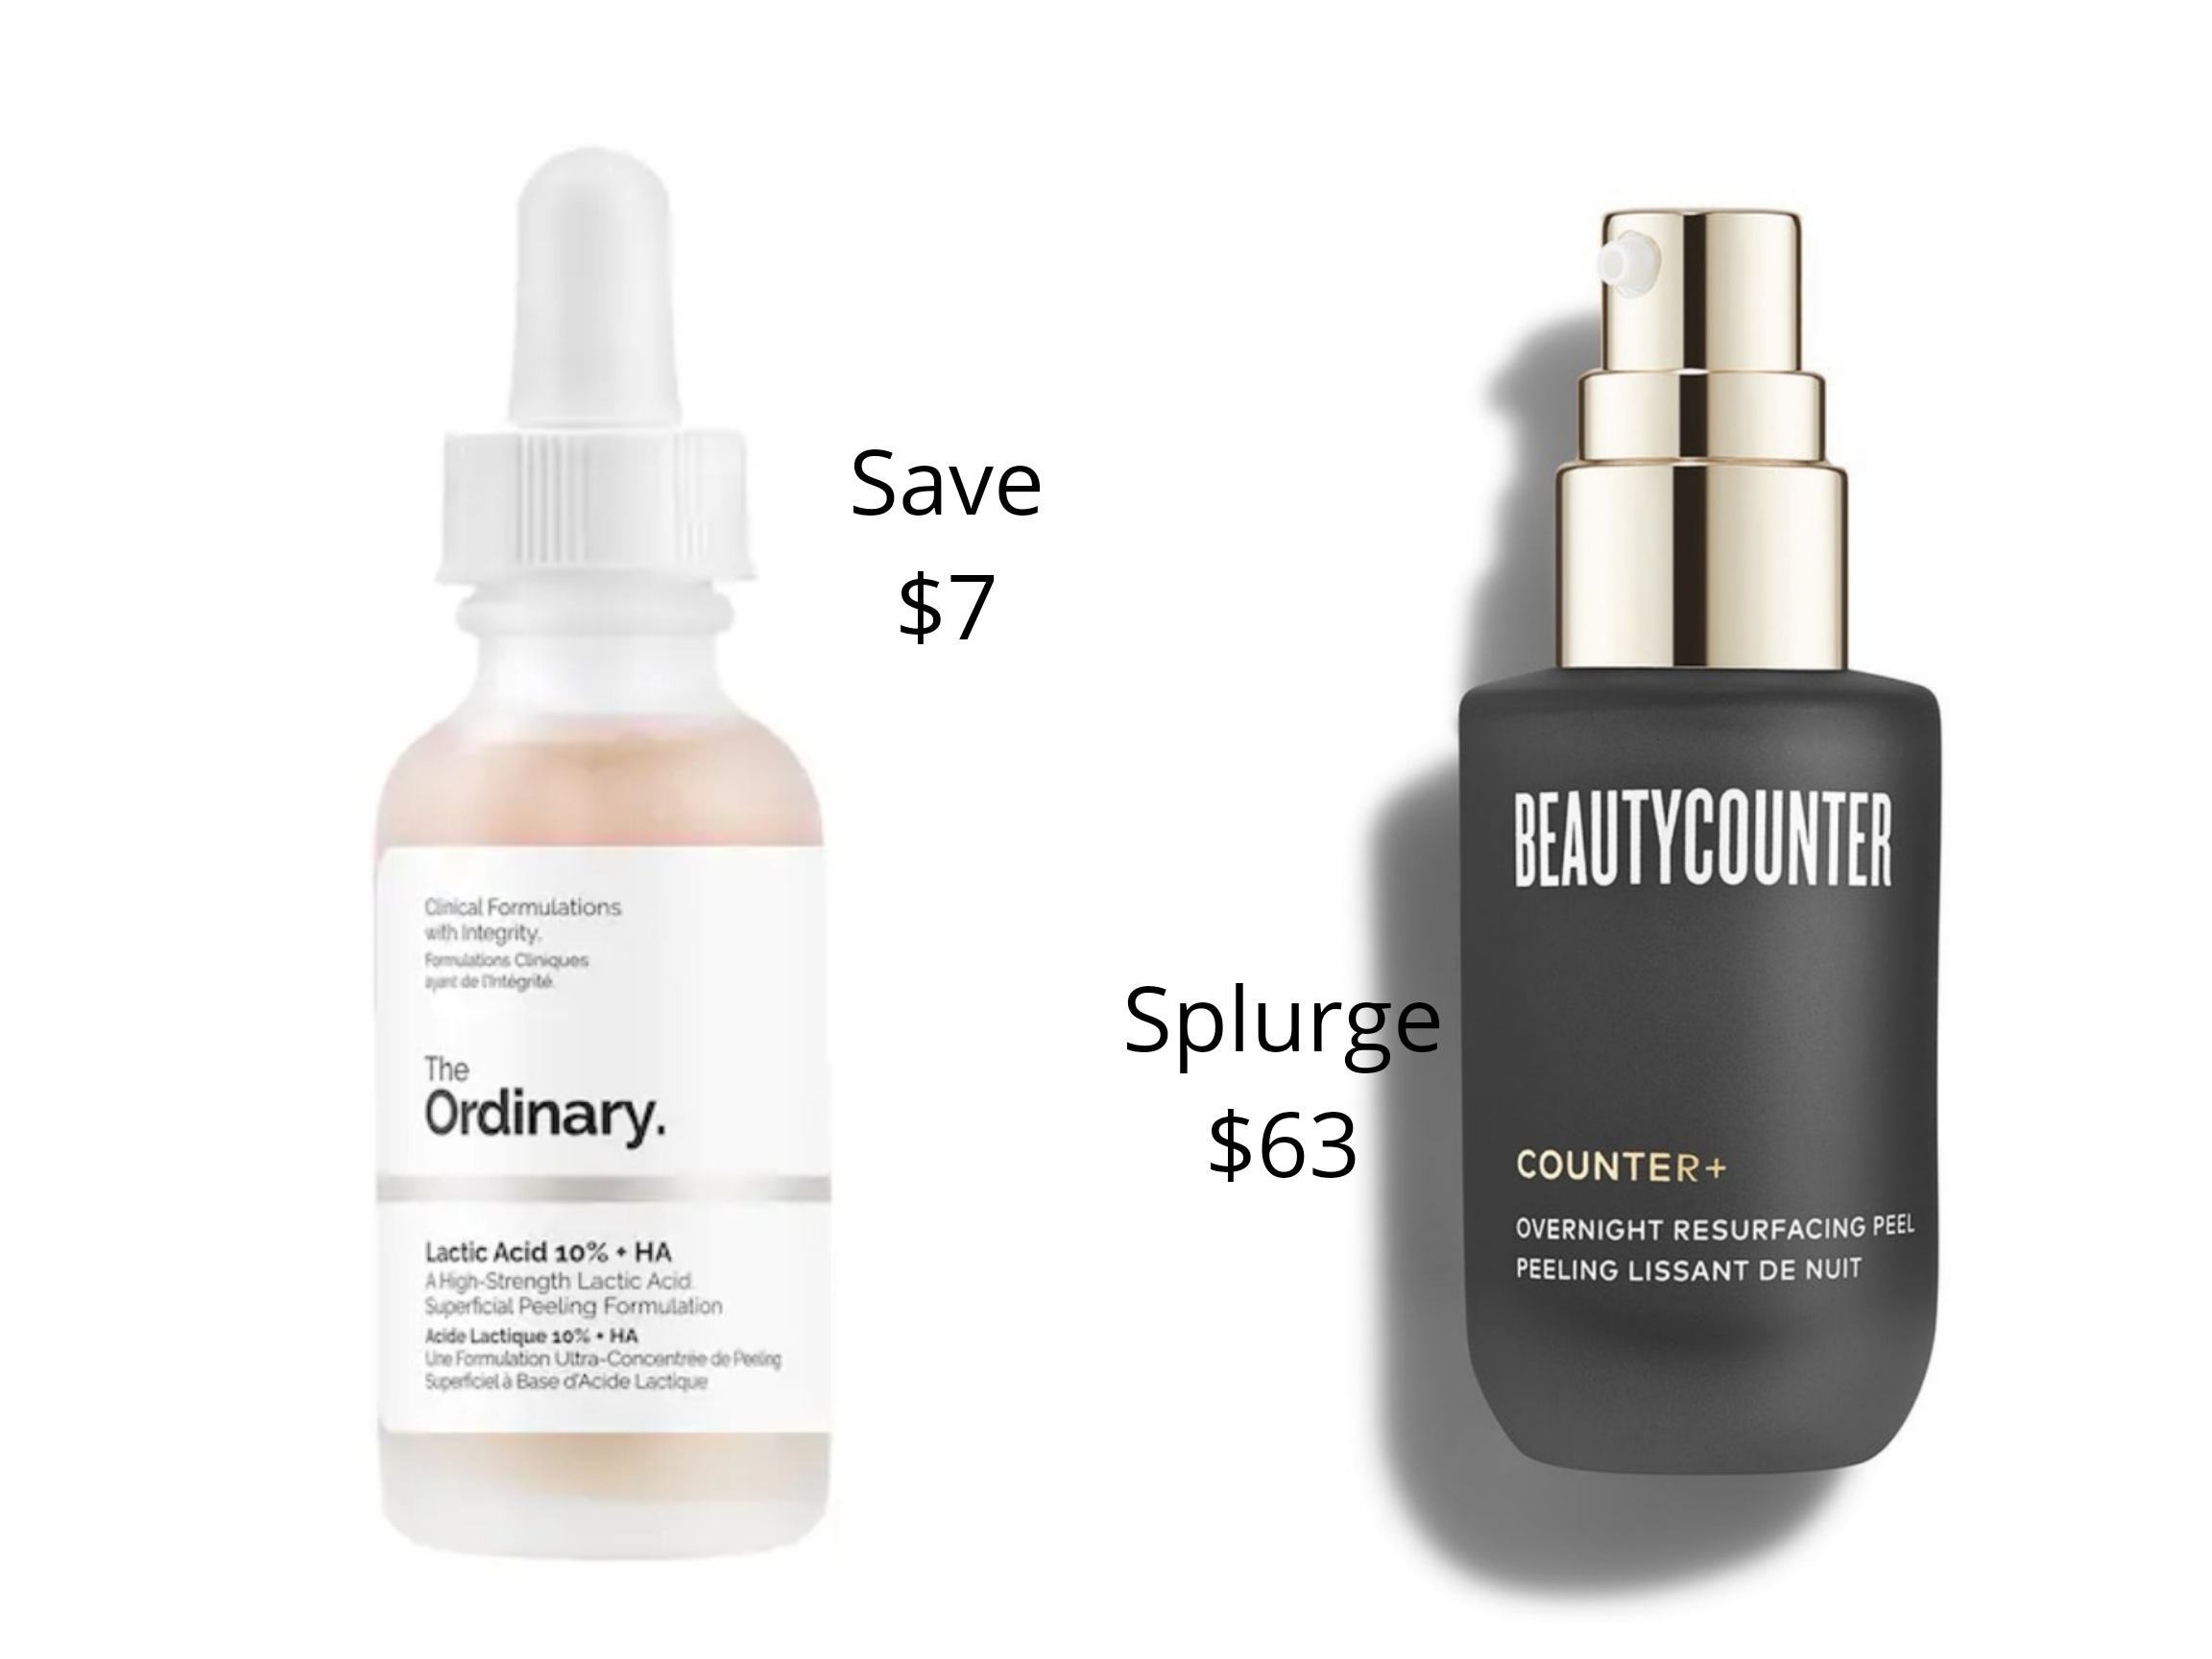 Orlando Beauty Blogger Emily of Fabulously Overdressed shares her favorite save vs splurge facial serums.